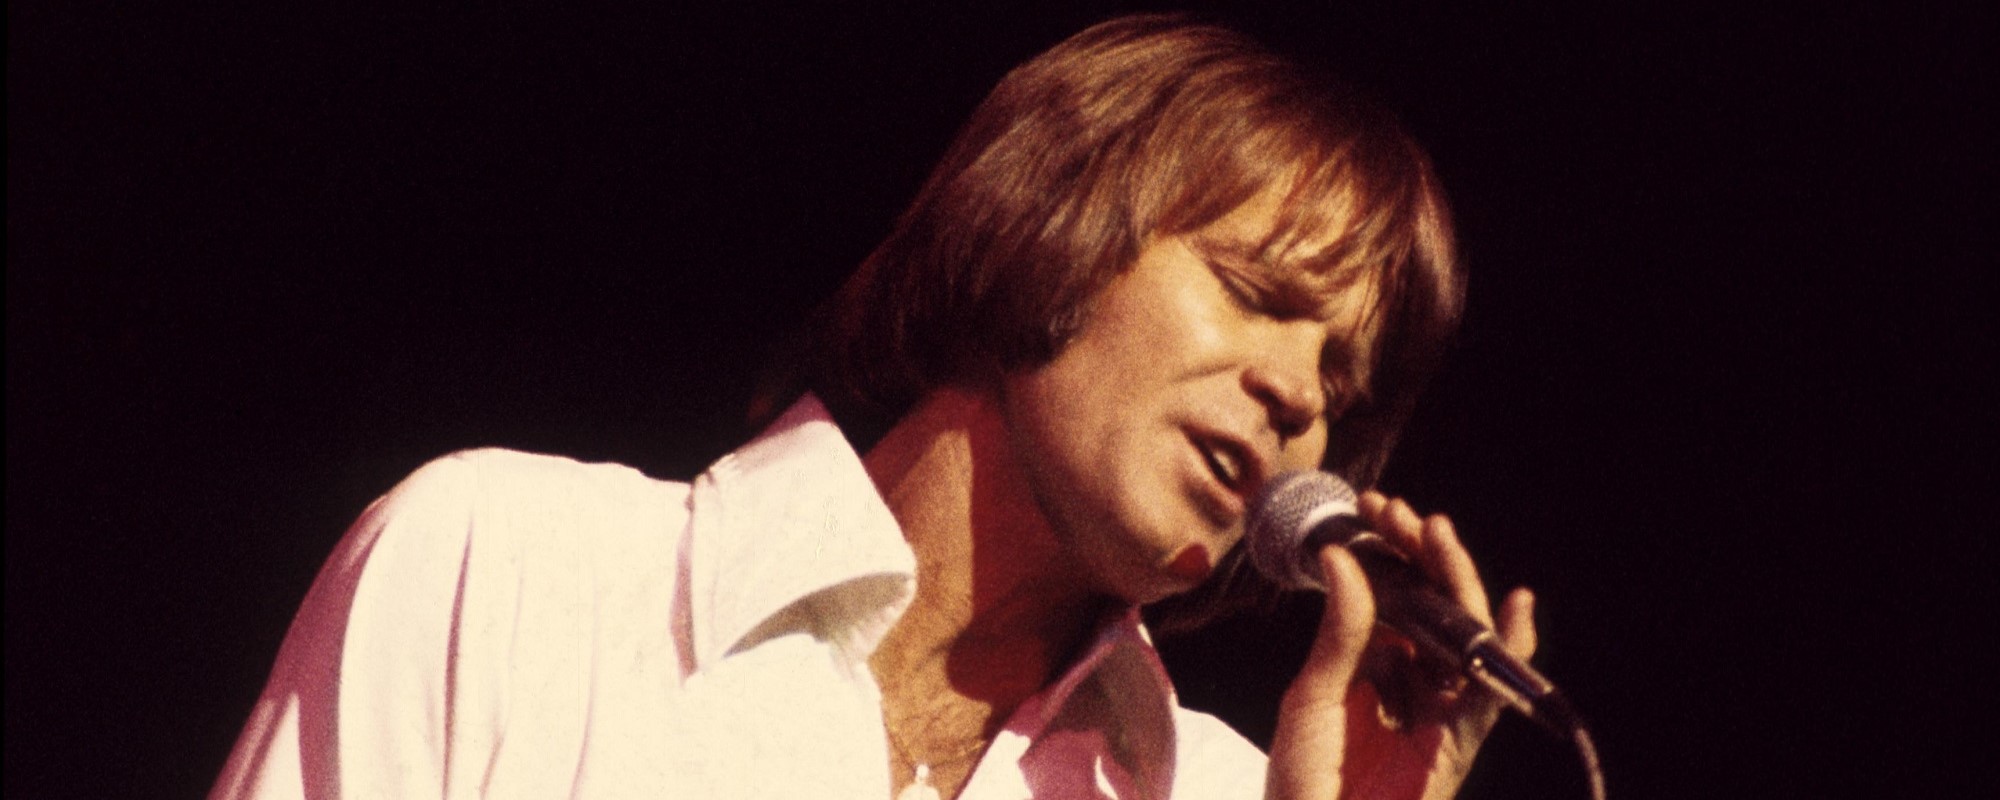 Remember When: Glen Campbell Scored His Second No. 1 Hot 100 Hit with the Country-Pop Classic “Southern Nights”